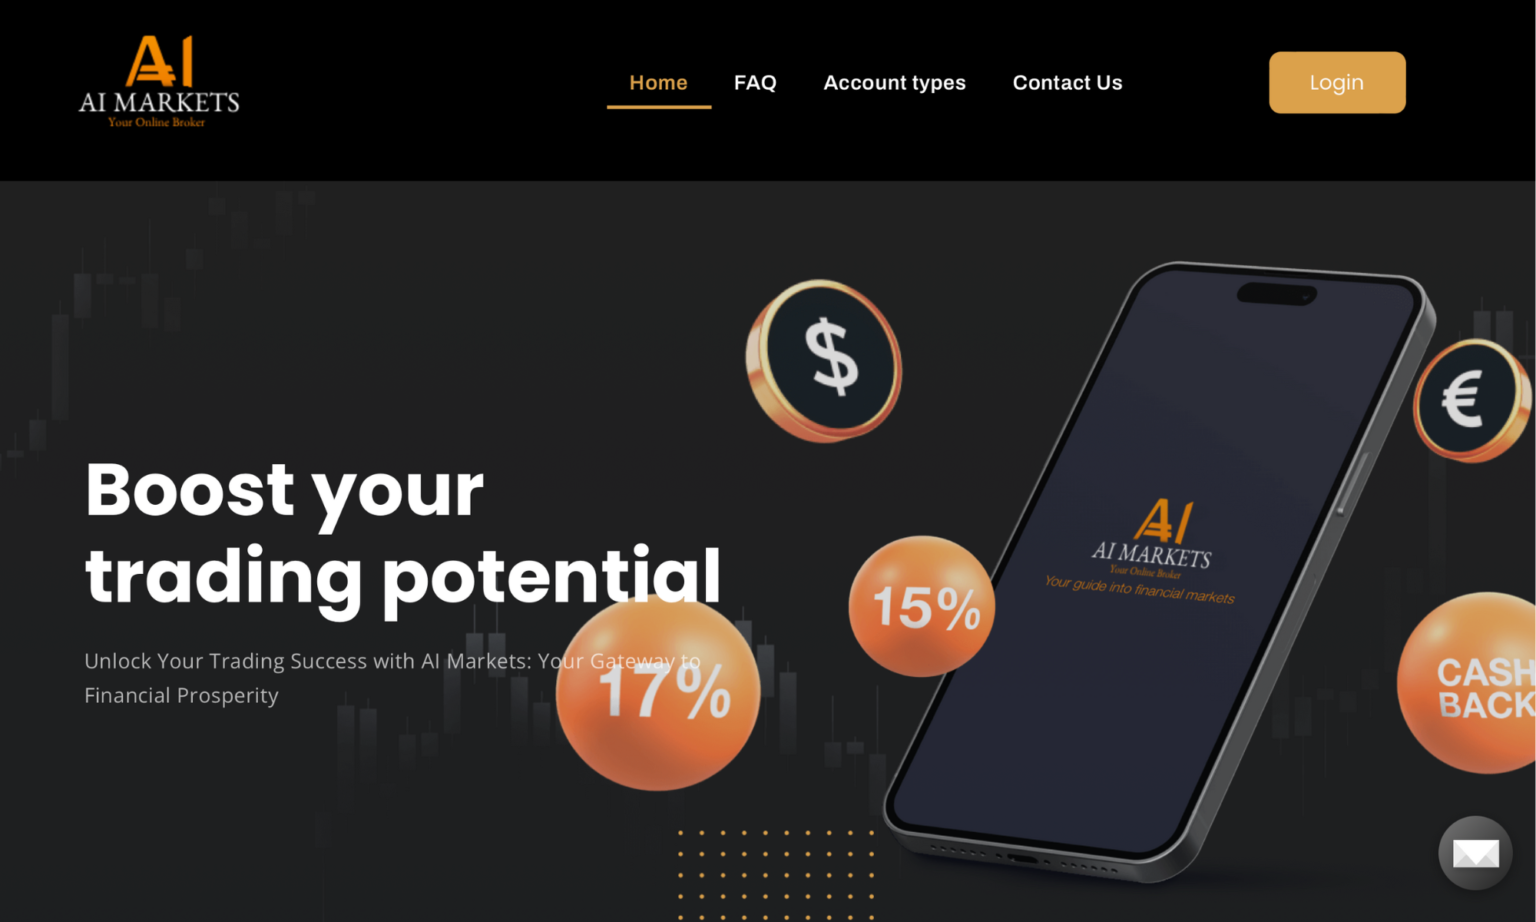 AI Markets homepage with the smartphone displaying their logotype